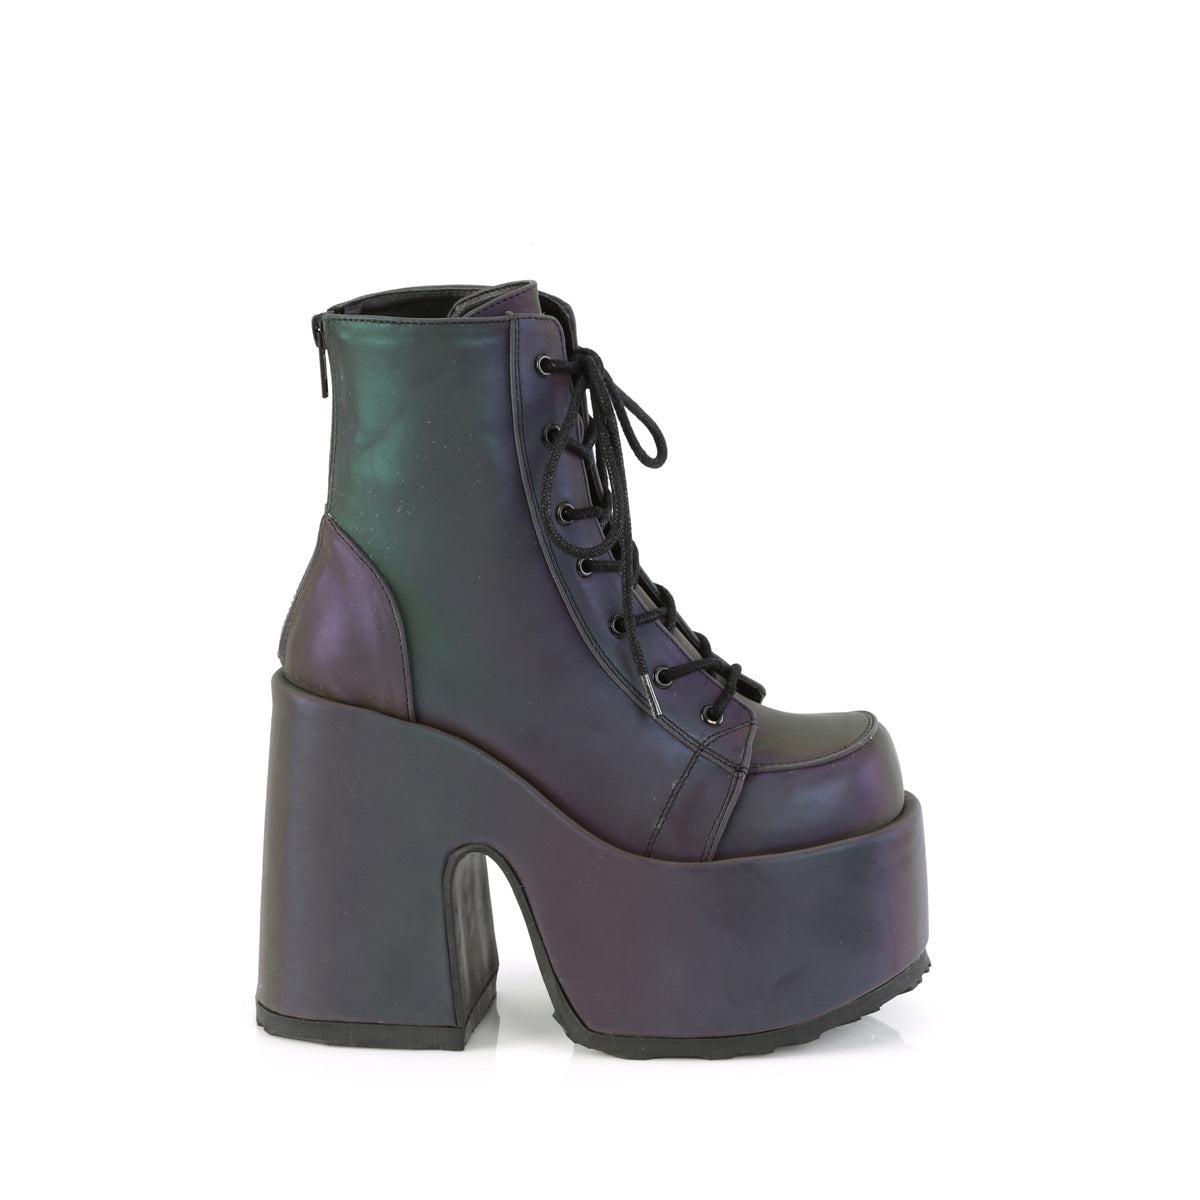 CAMEL-203 Green Multi Reflective Ankle Boot Demonia